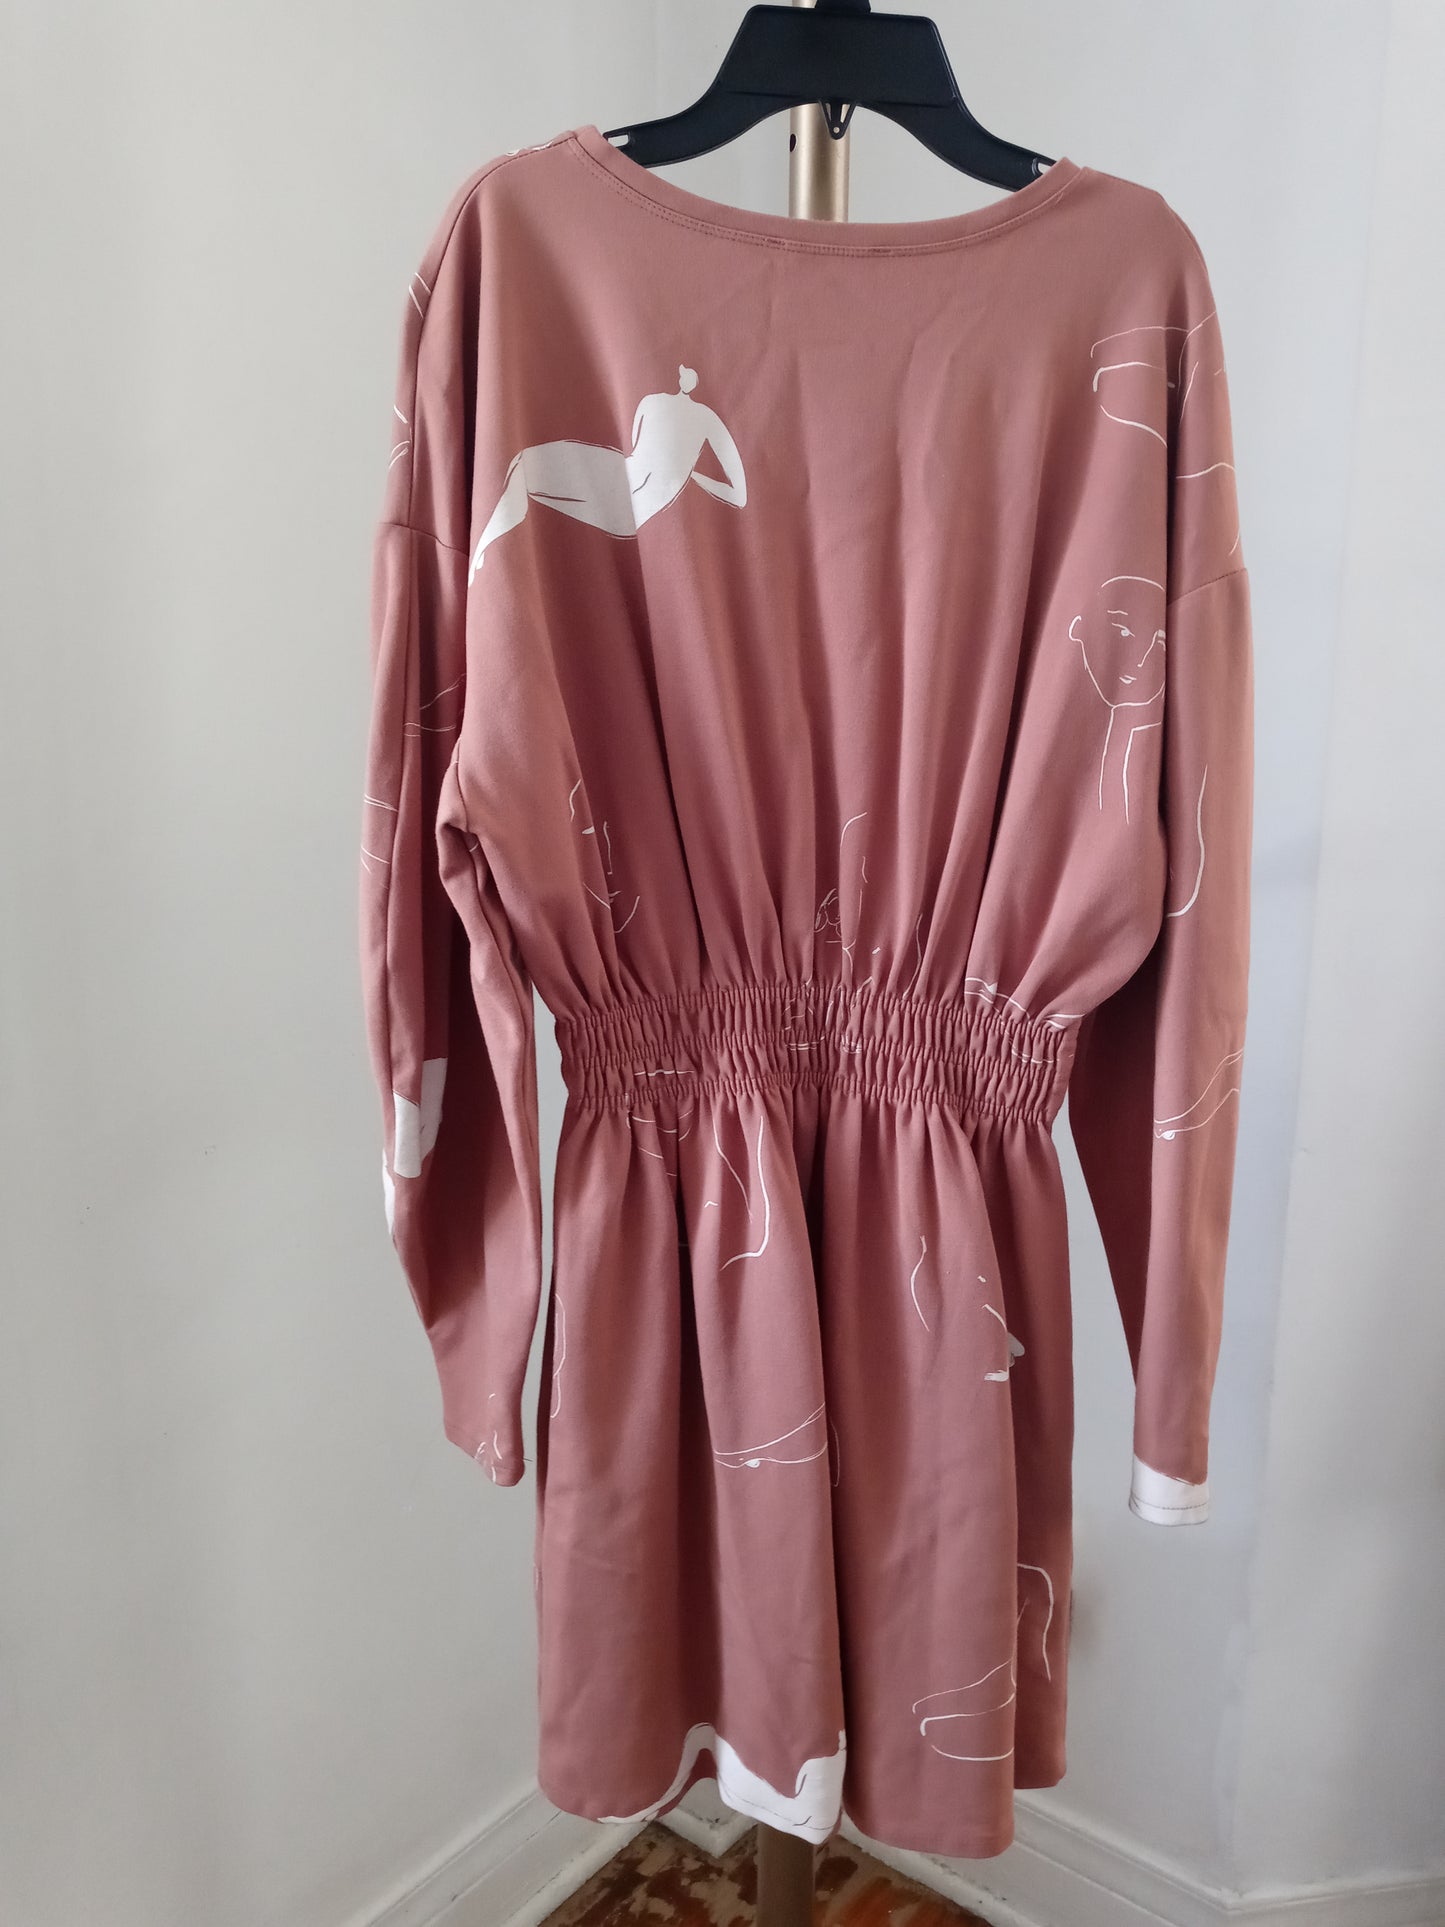 Zara dusty pink long sleeve dress with abstract line drawing of female